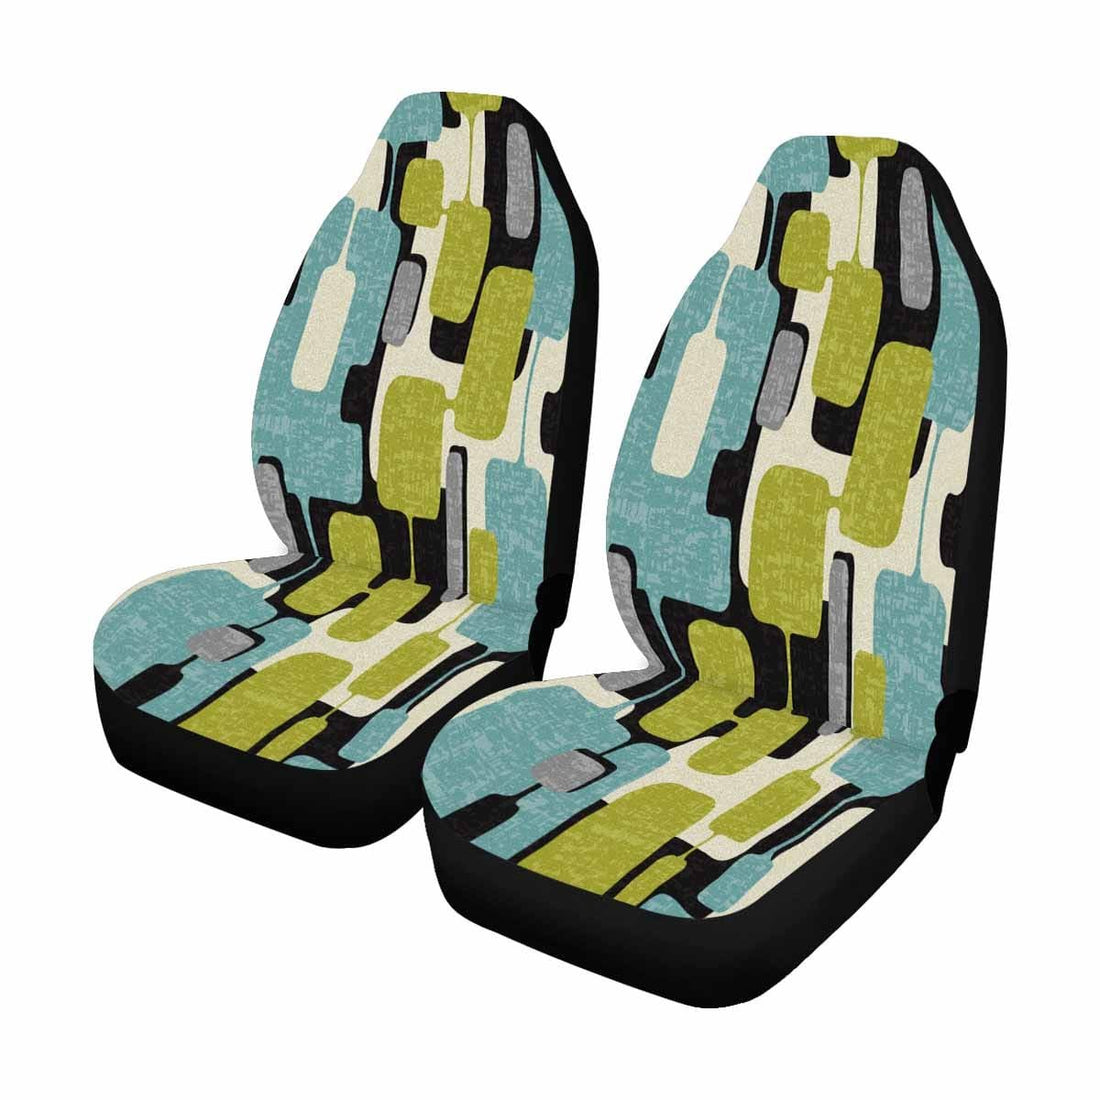 Kate McEnroe New York Set of 2 Mid Century Modern Geometric Car Seat Covers in Aqua Blue, Lime Green, Gray, and CreamCar Seat CoversDG1452072DXH2742D